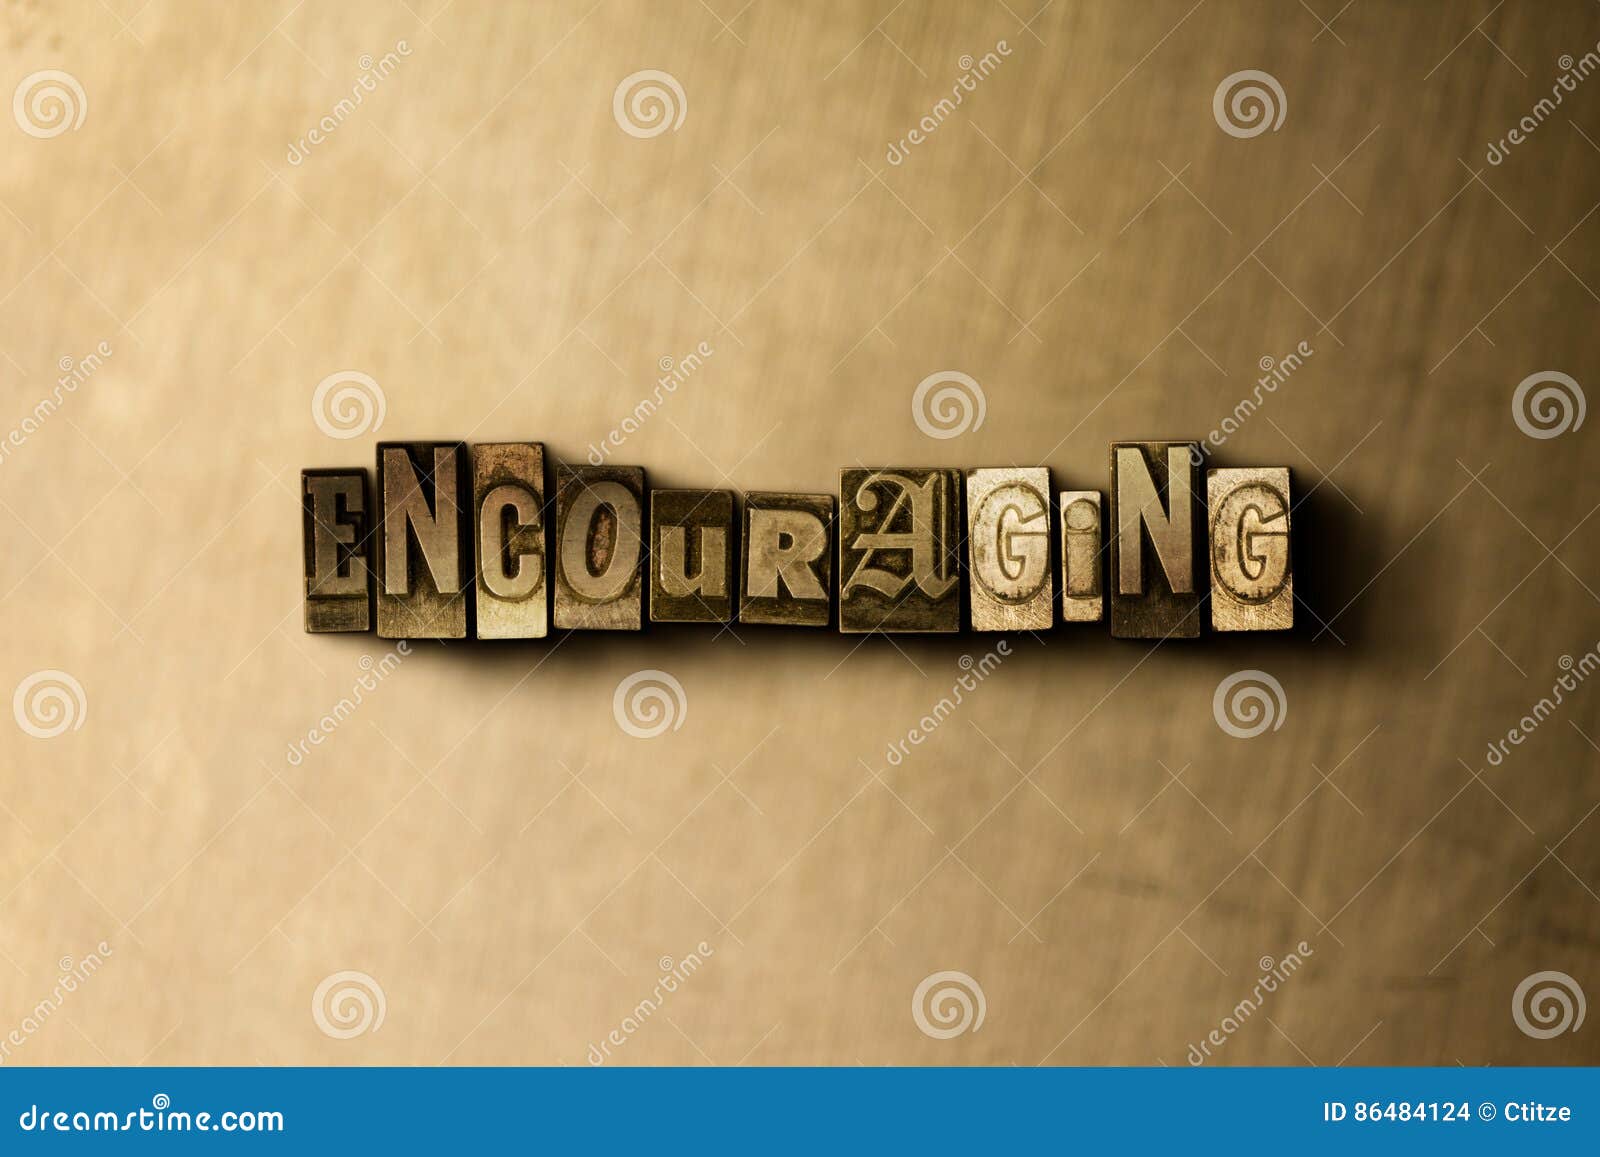 ENCOURAGING - Close-up of Grungy Vintage Typeset Word on Metal Backdrop